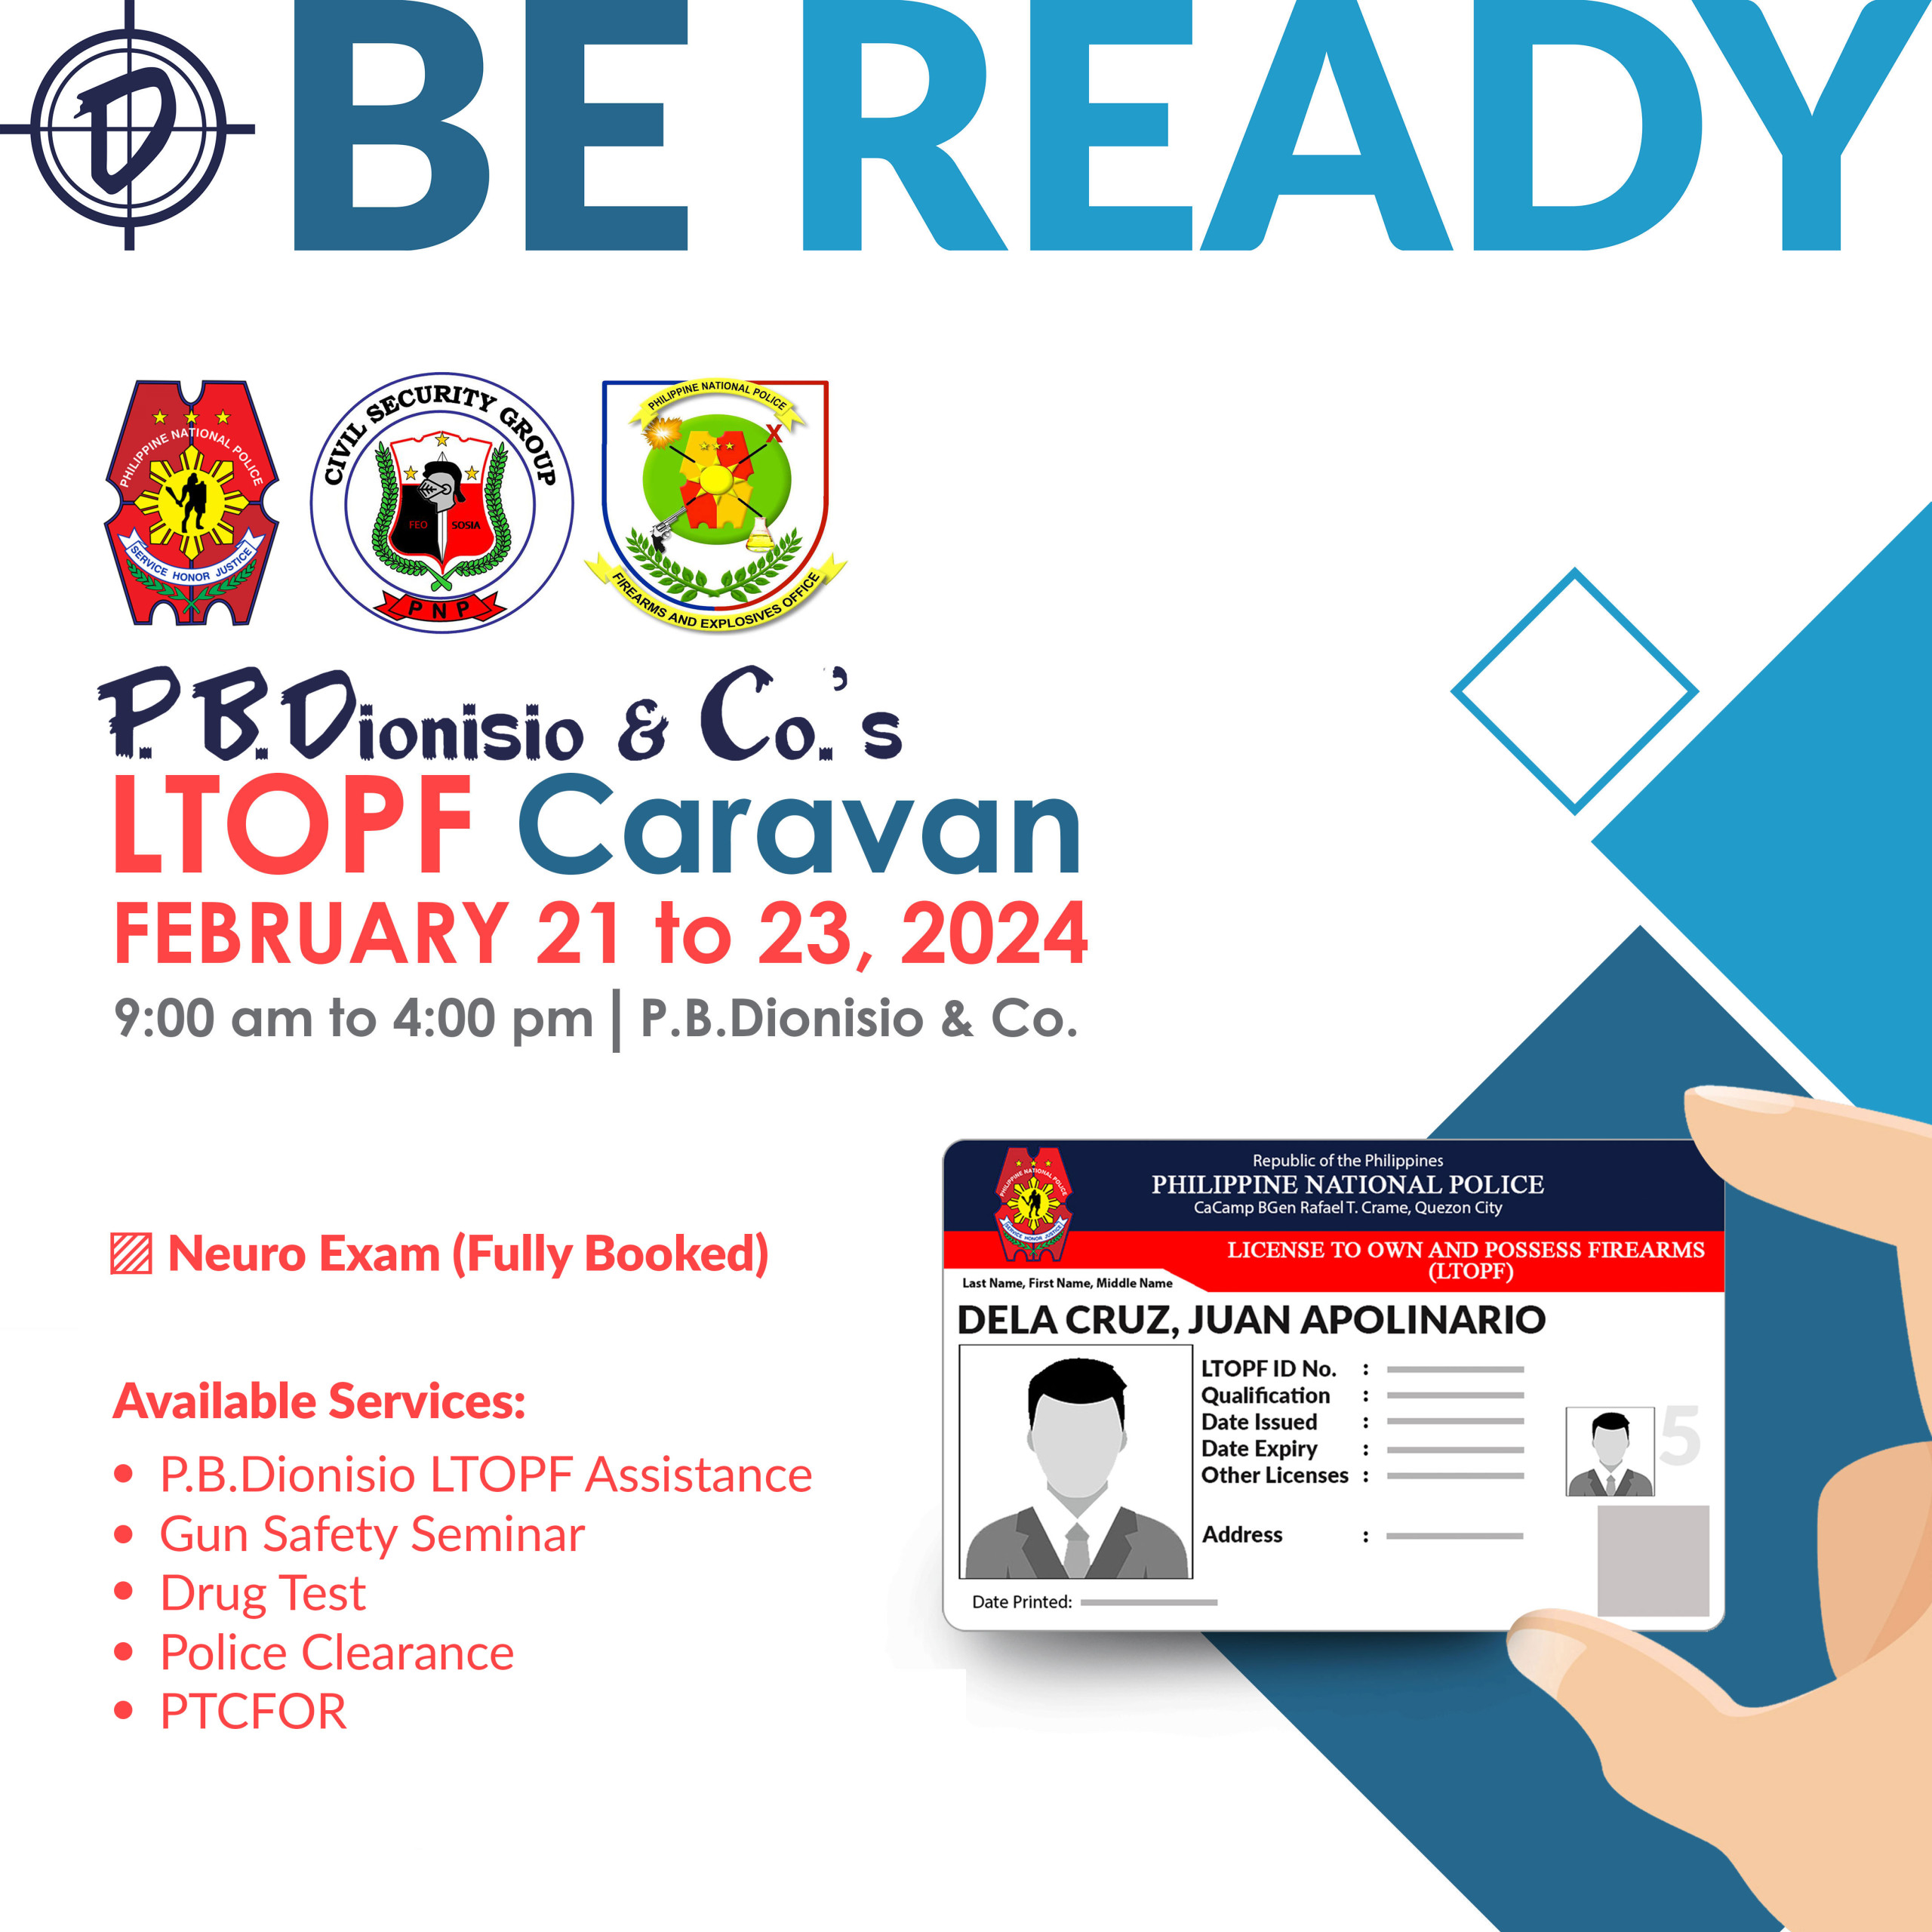 LTOPF Caravan on February 21 to 23, 2024 at P.B.Dionisio & Co.